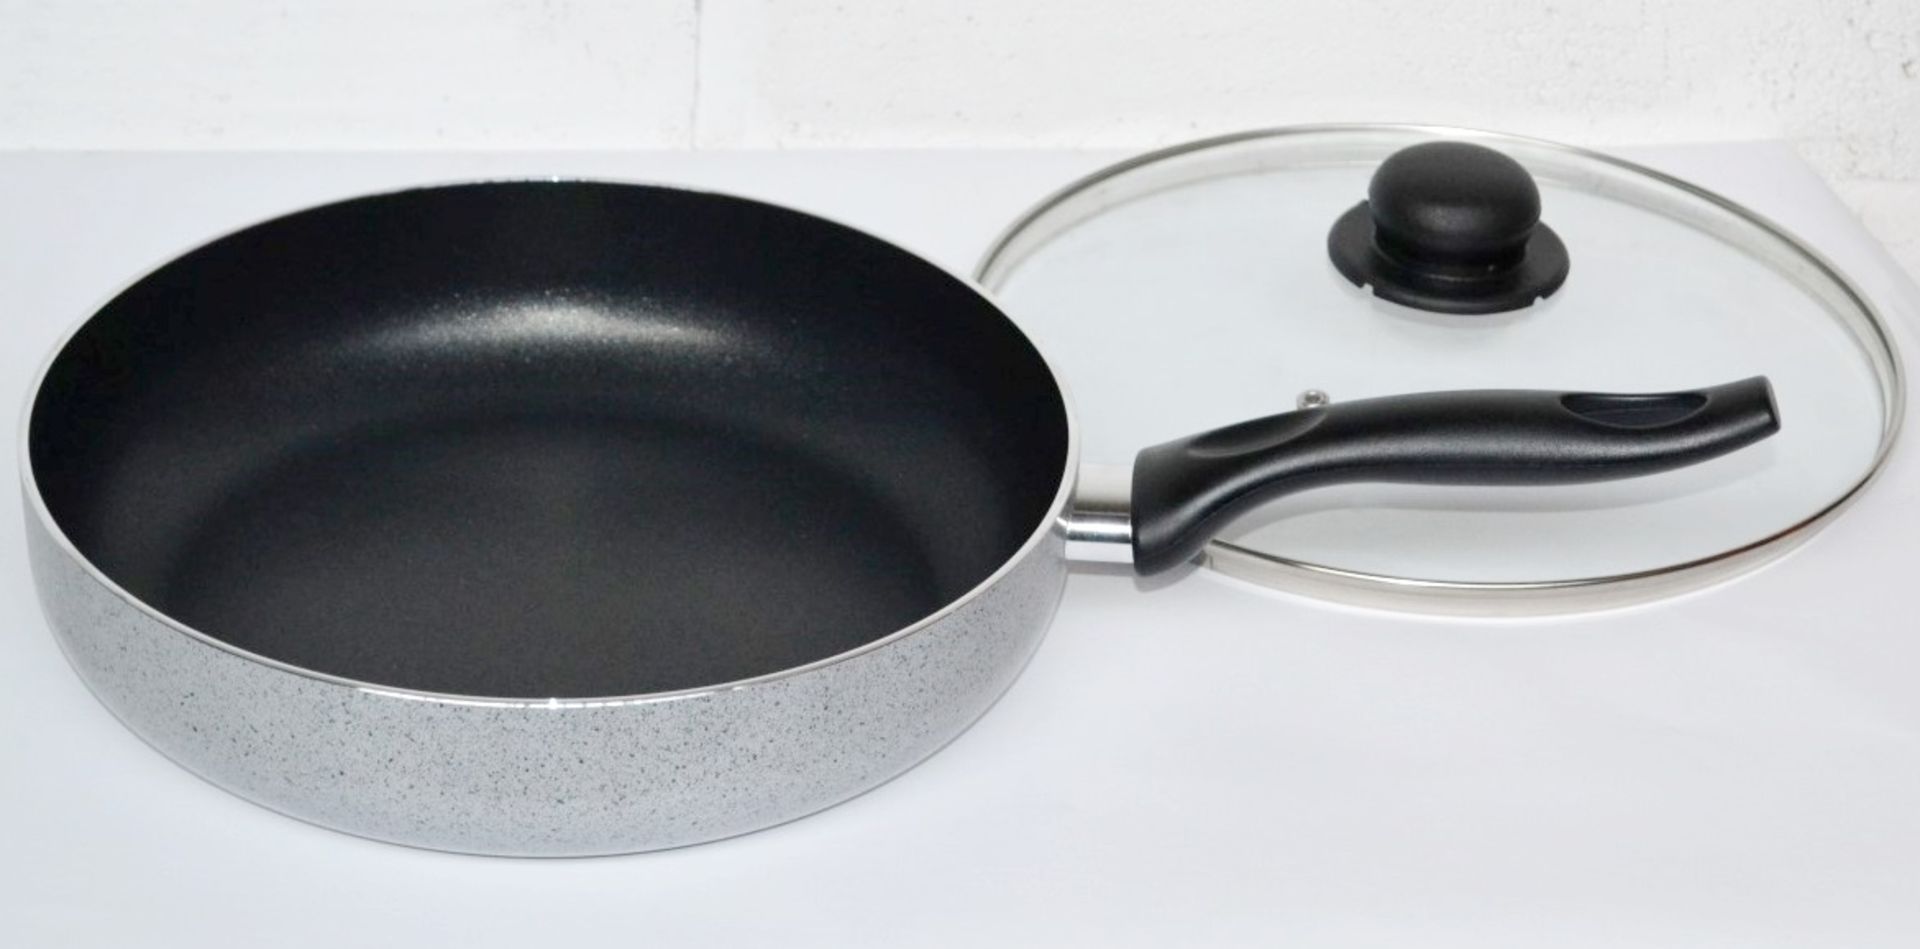 1 x 28cm Non-stick Frying Pans with Glass Lids - Colour: Stone Grey - Made In Italy - New & Sealed S - Image 5 of 5